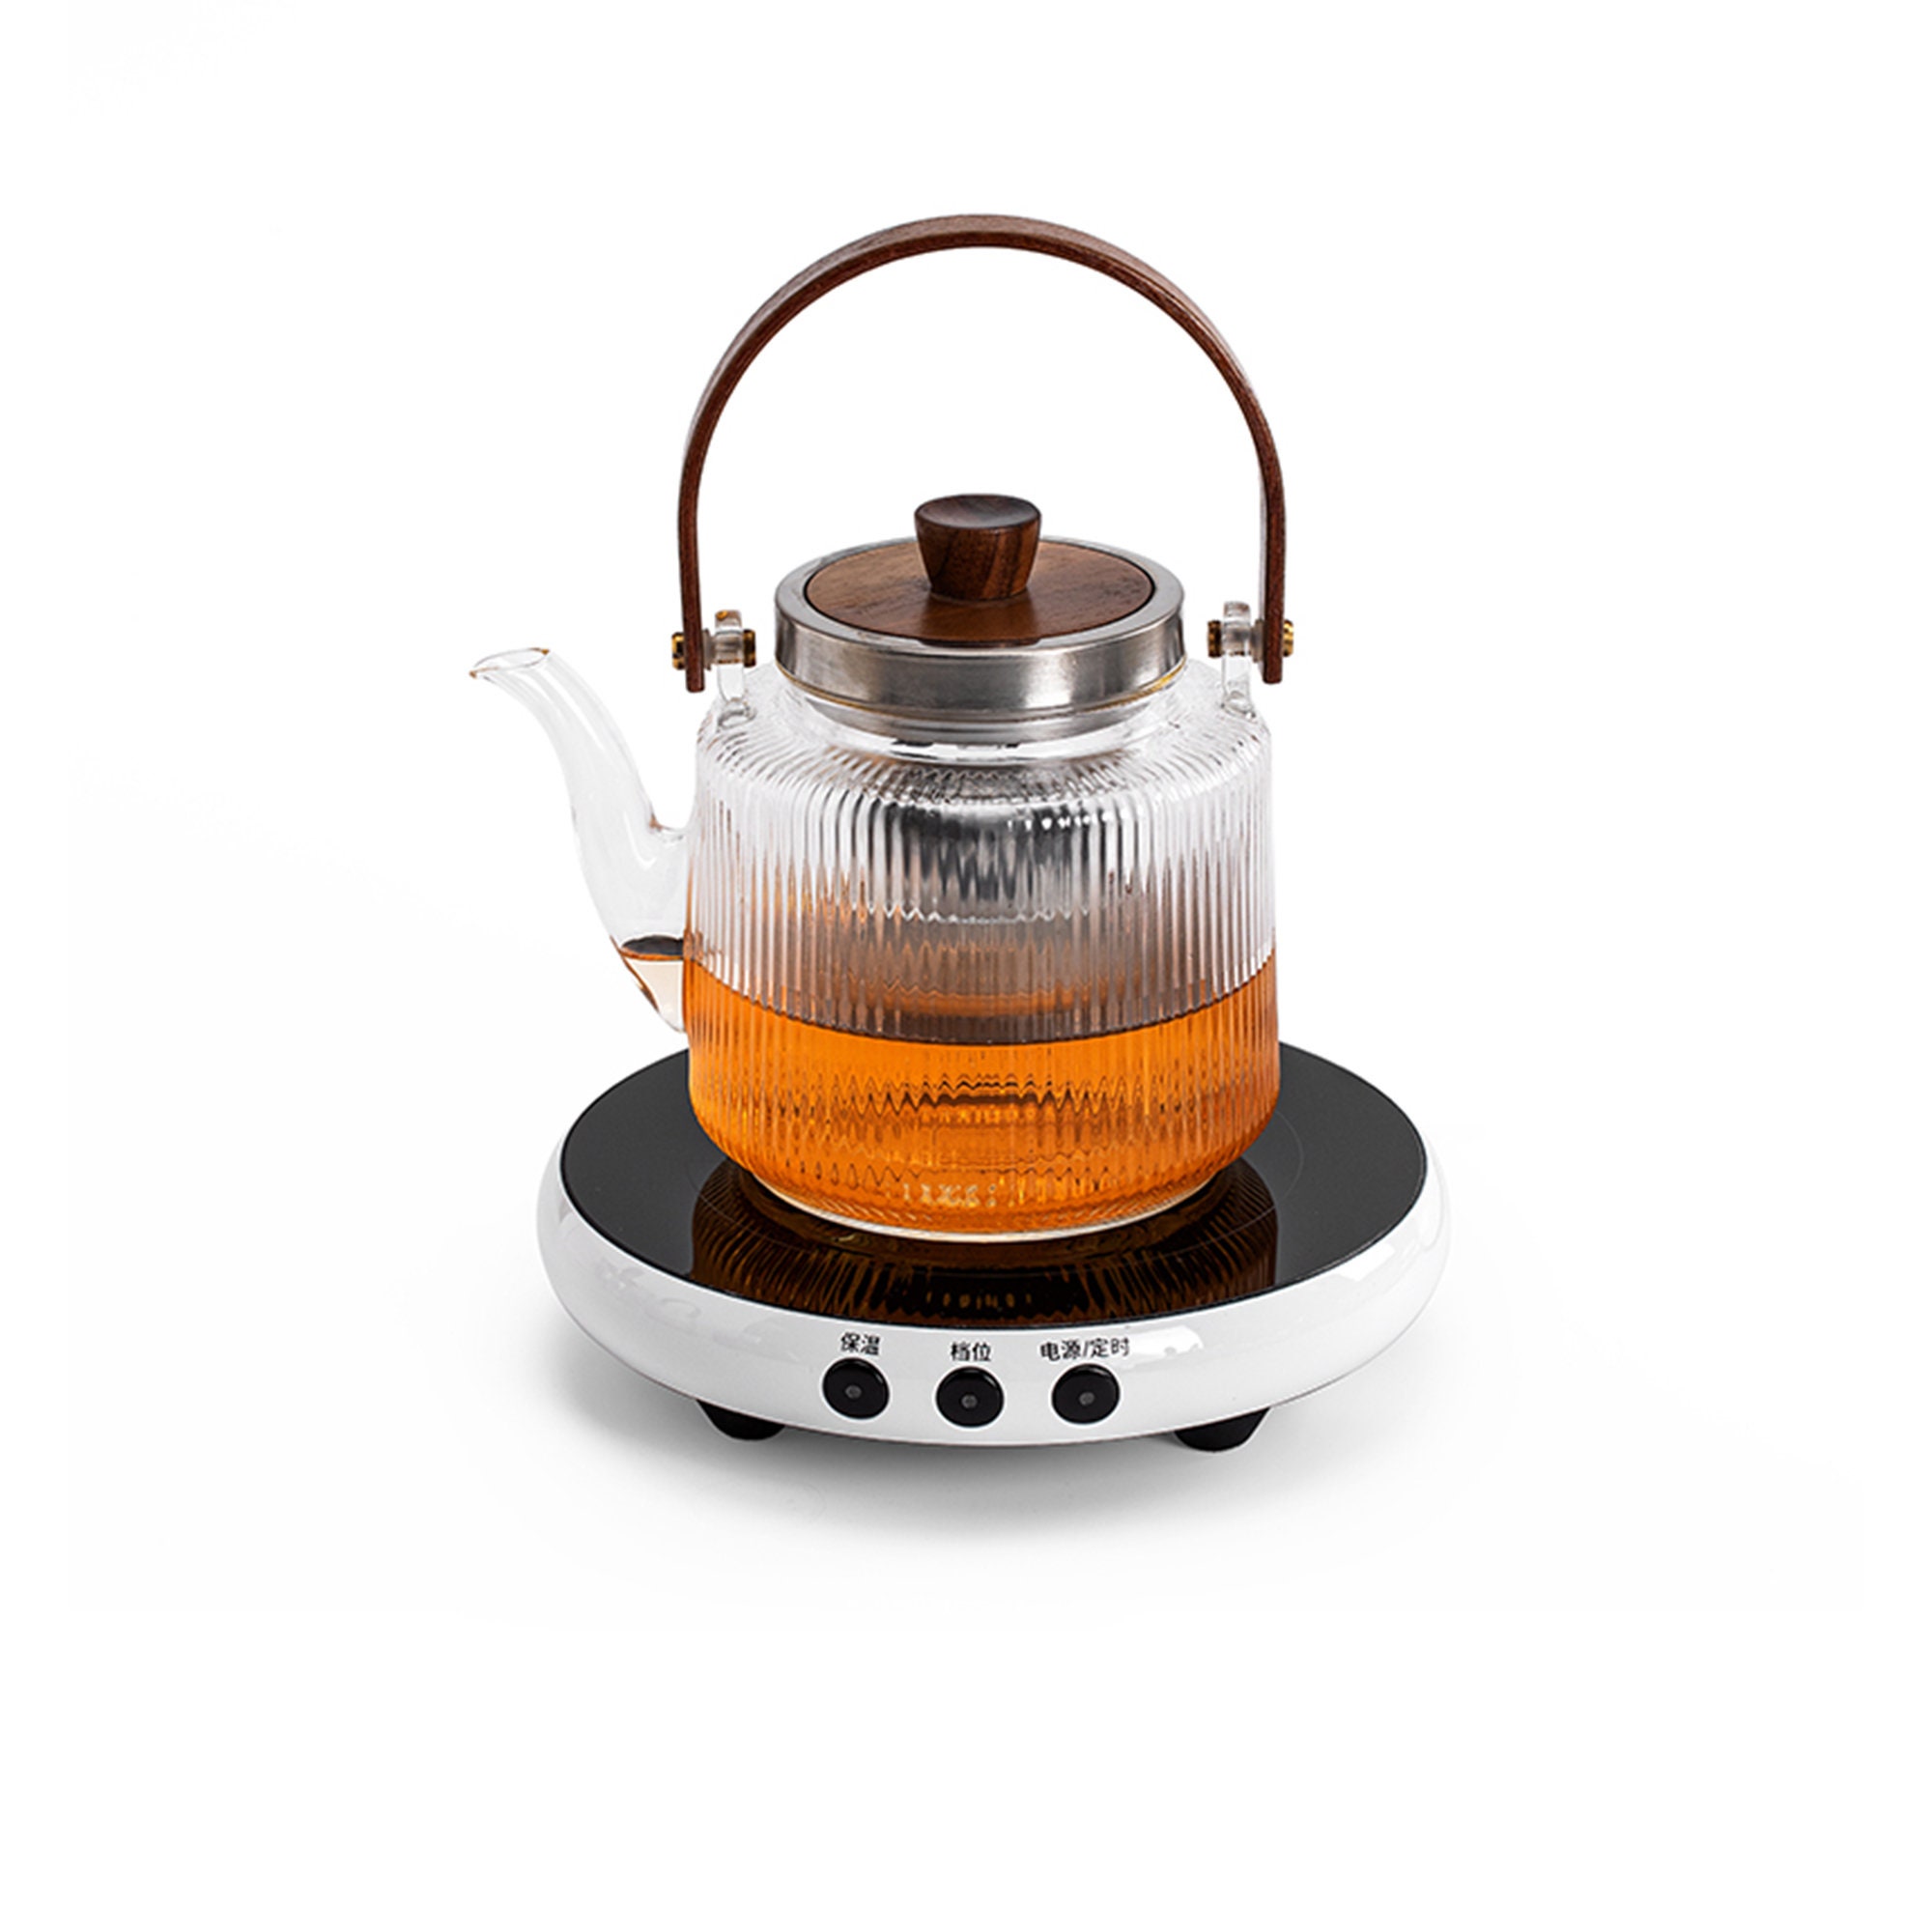 Modern Glass Tea Kettle With Electric Temperature Control Stove 13.5 Stove  Top Teapot Dining Decor Housewarming Gift 